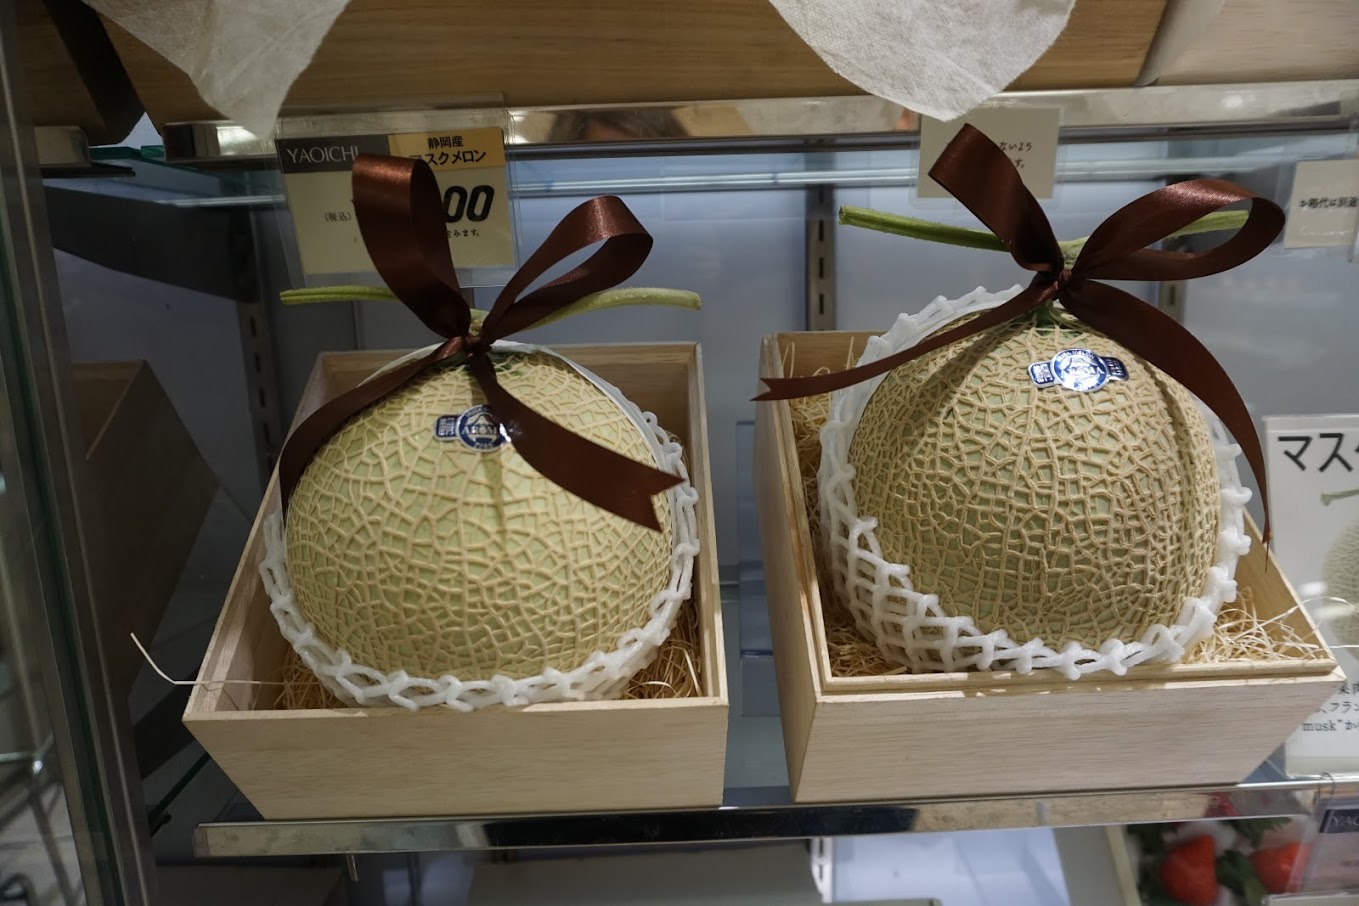 Melon dolled up with a bow in Japan